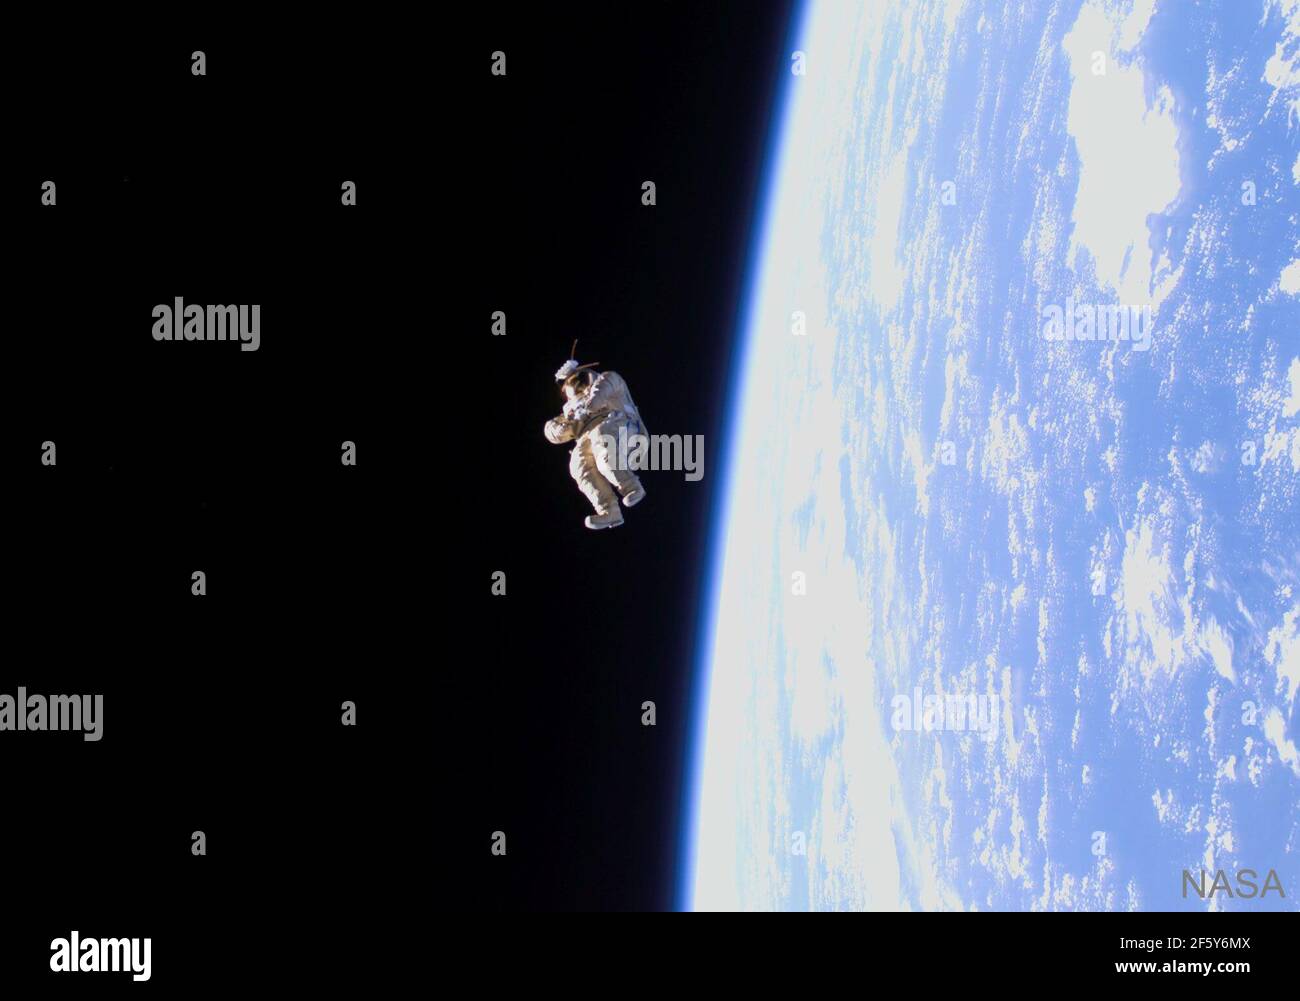 A spacesuit floated away from the International Space Station 15 years ago, but no investigation was conducted. Everyone knew that it was pushed by the space station crew. Dubbed Suitsat-1, the unneeded Russian Orlan spacesuit filled mostly with old clothes was fitted with a faint radio transmitter and released to orbit the Earth. The suit circled the Earth twice before its radio signal became unexpectedly weak. Suitsat-1 continued to orbit every 90 minutes until it burned up in the Earth's atmosphere after a few weeks. Pictured, the lifeless spacesuit was photographed in 2006 just as it drift Stock Photo